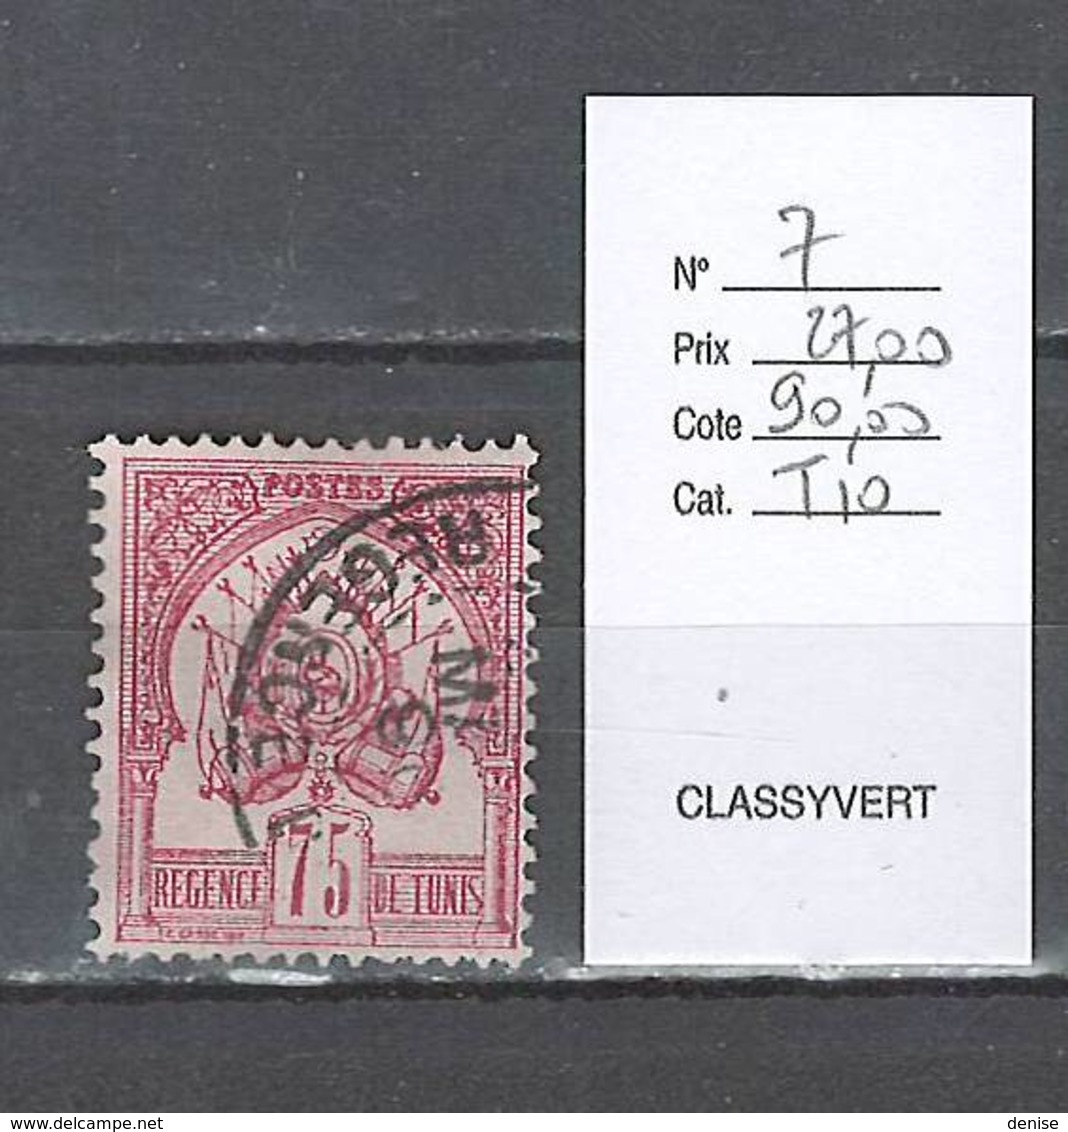 Tunisie - Yvert 7 - Armoiries Chiffres Maigres - 75 Centimes   - Oblitéré - Used Stamps